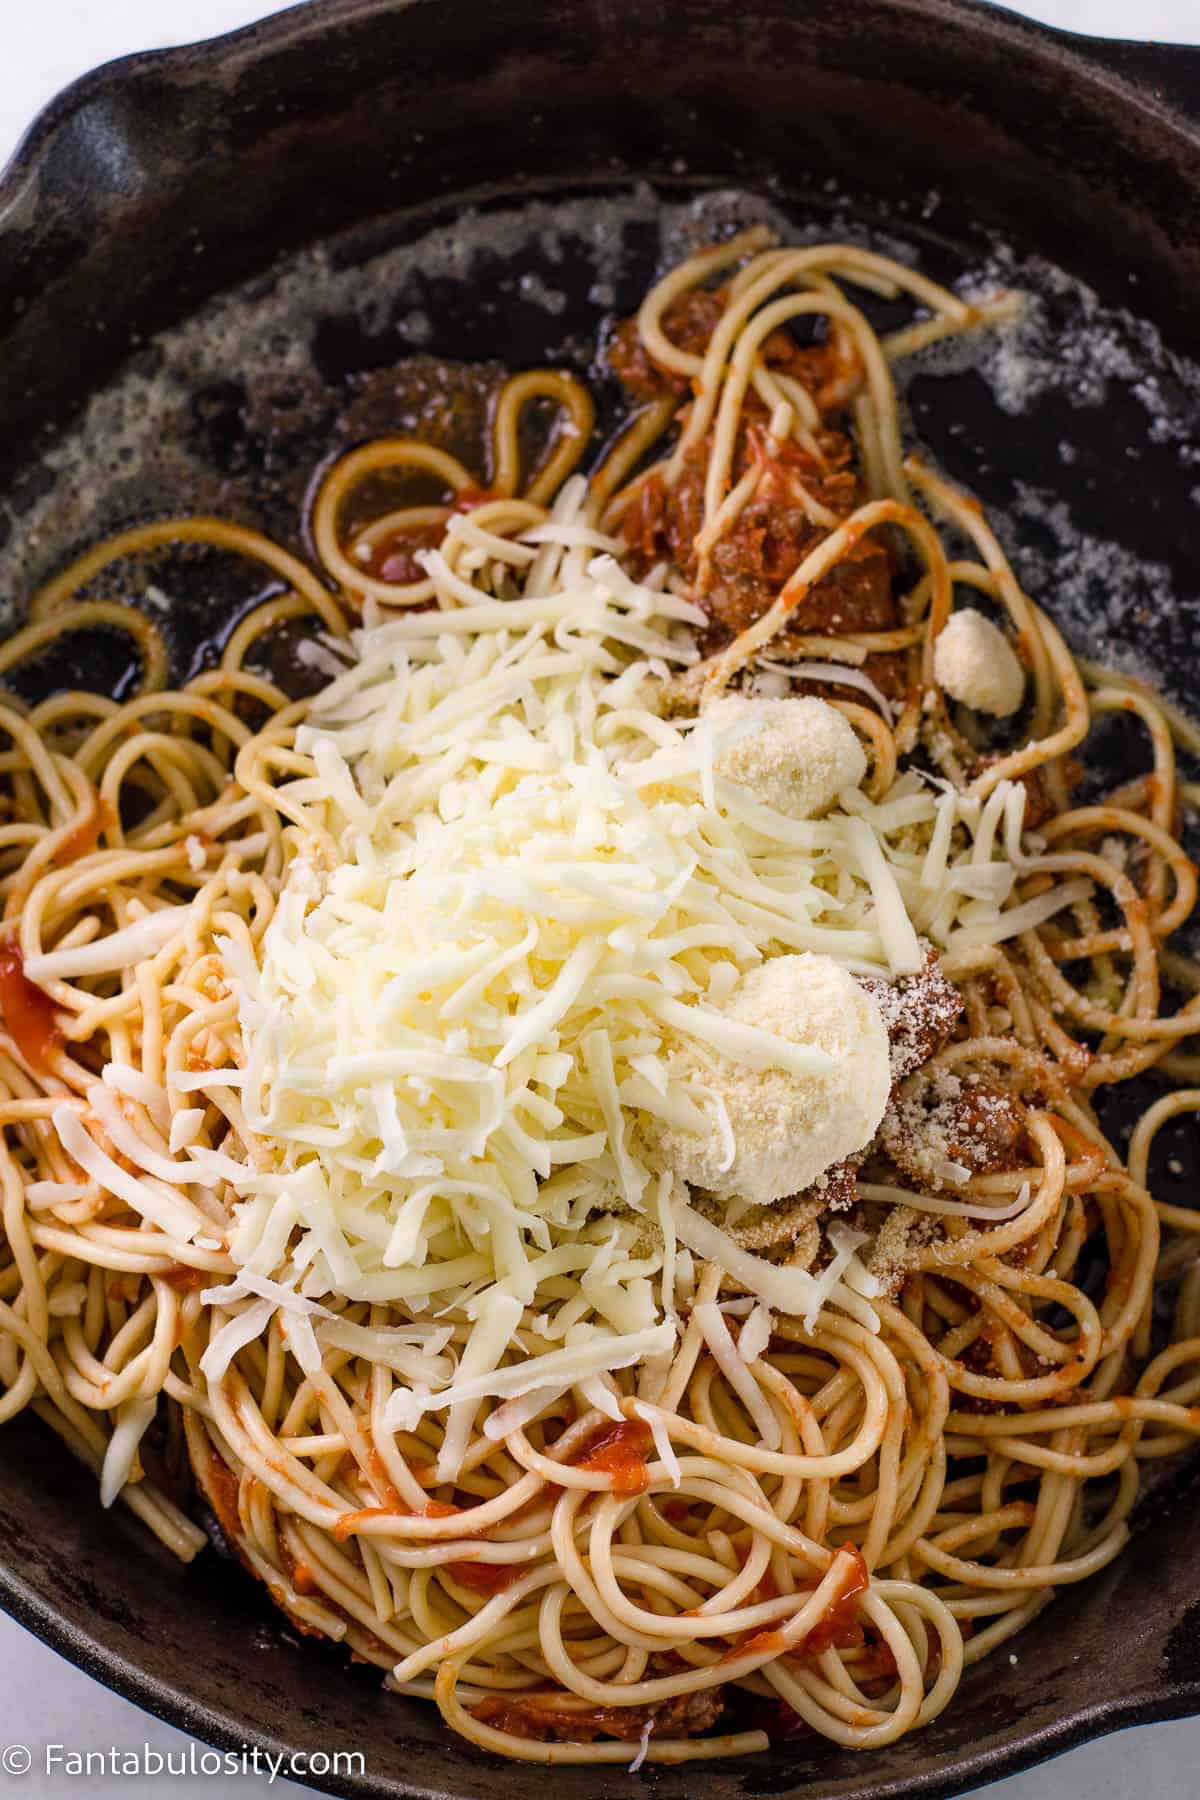 Some of the mozzarella and parmesan cheese sprinkled on top of leftover spaghetti in cast iron.